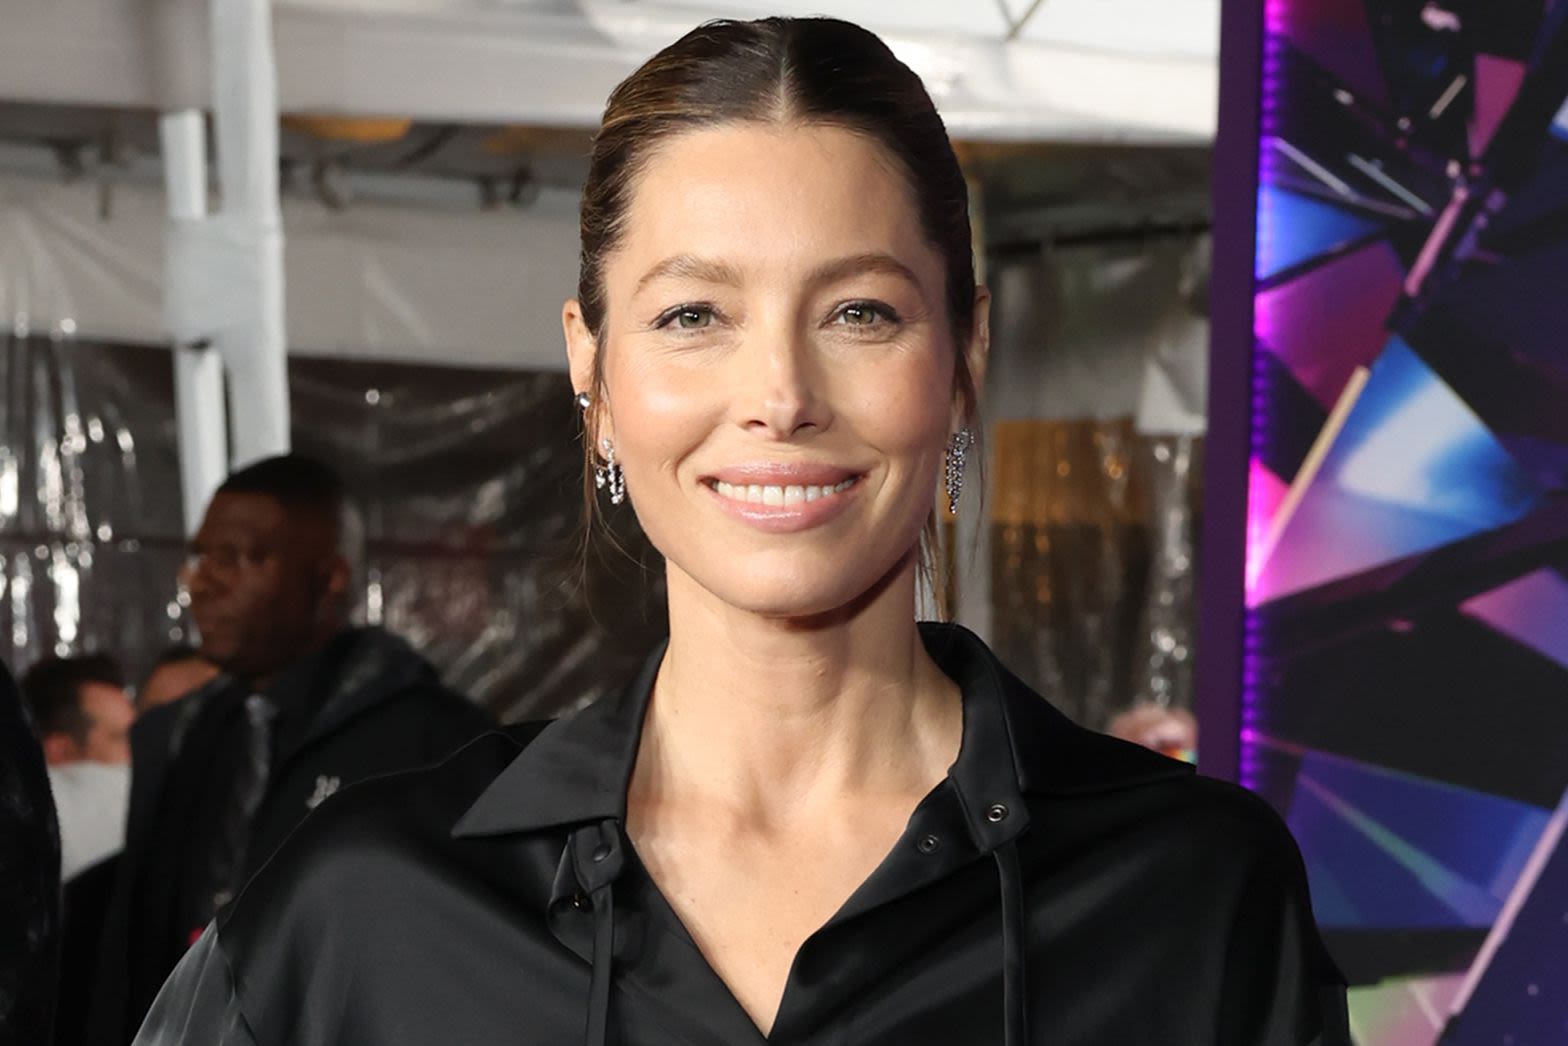 Jessica Biel Was 'Shocked How Little' She Knew About Her Own Body Until She Struggled to Get Pregnant in Her 30s (Exclusive)